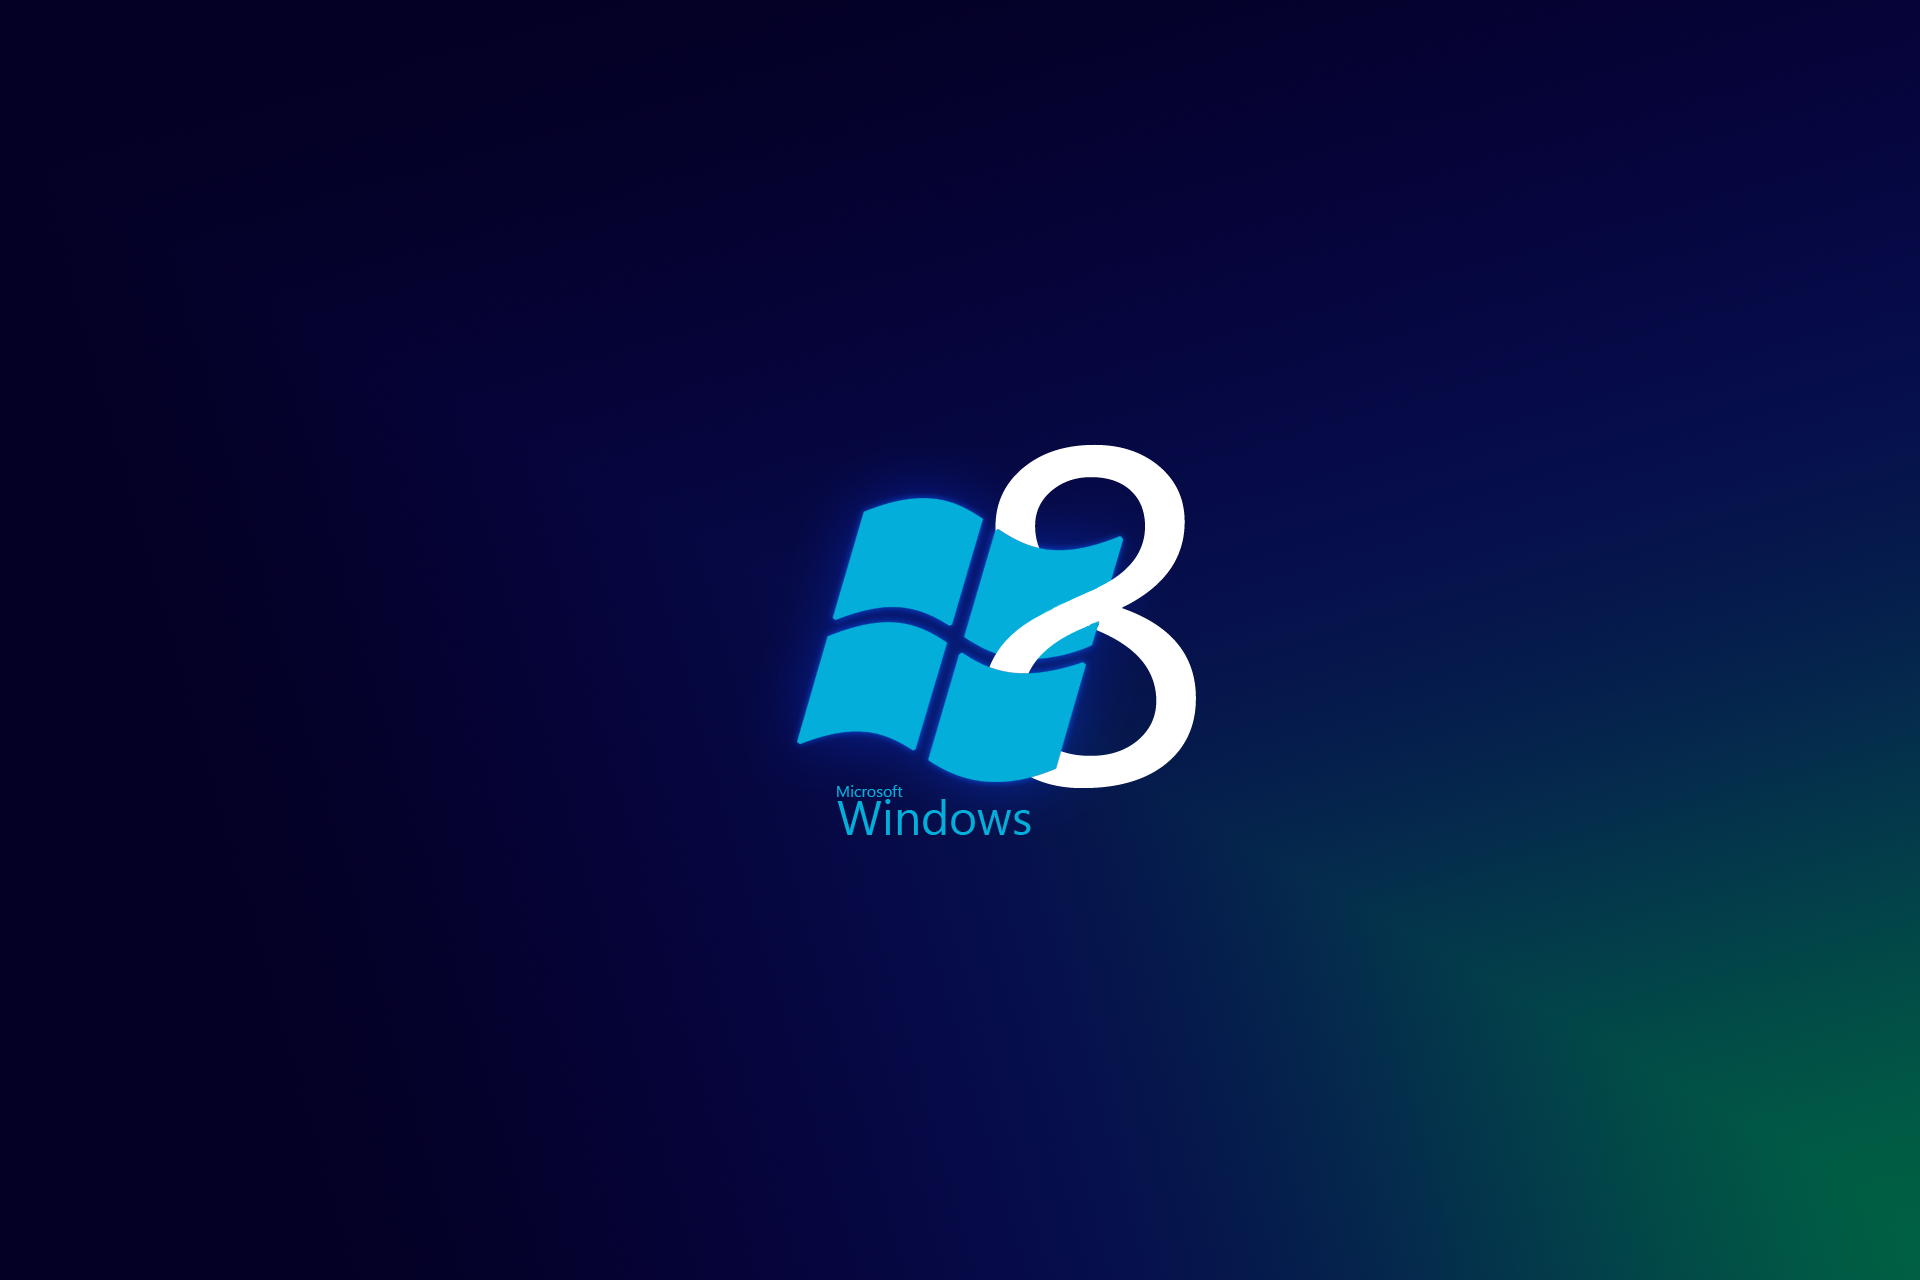 Windows 8 Wallpapers, Pictures, Images Full Hd Wallpapers For Windows 8 1920x1080